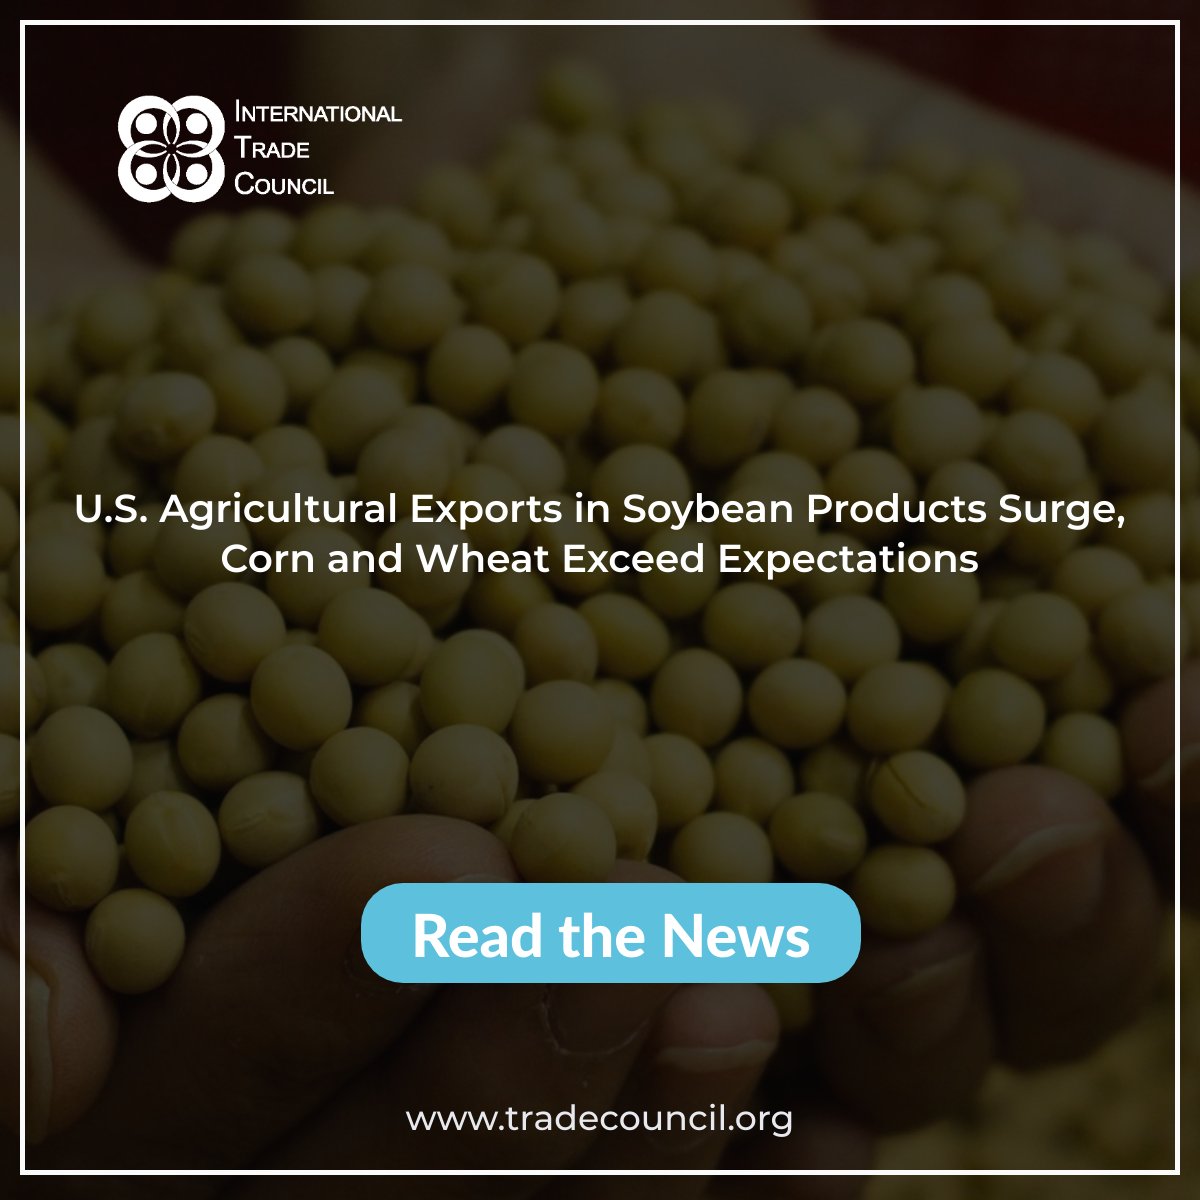 U.S. Agricultural Exports in Soybean Products Surge, Corn and Wheat Exceed Expectations
Read The News: tradecouncil.org/u-s-agricultur…
#ITCNewsUpdates #PositiveExports #AgriculturalSuccess #USExportGrowth #MarketResilience #GlobalDemand #InternationalTrade